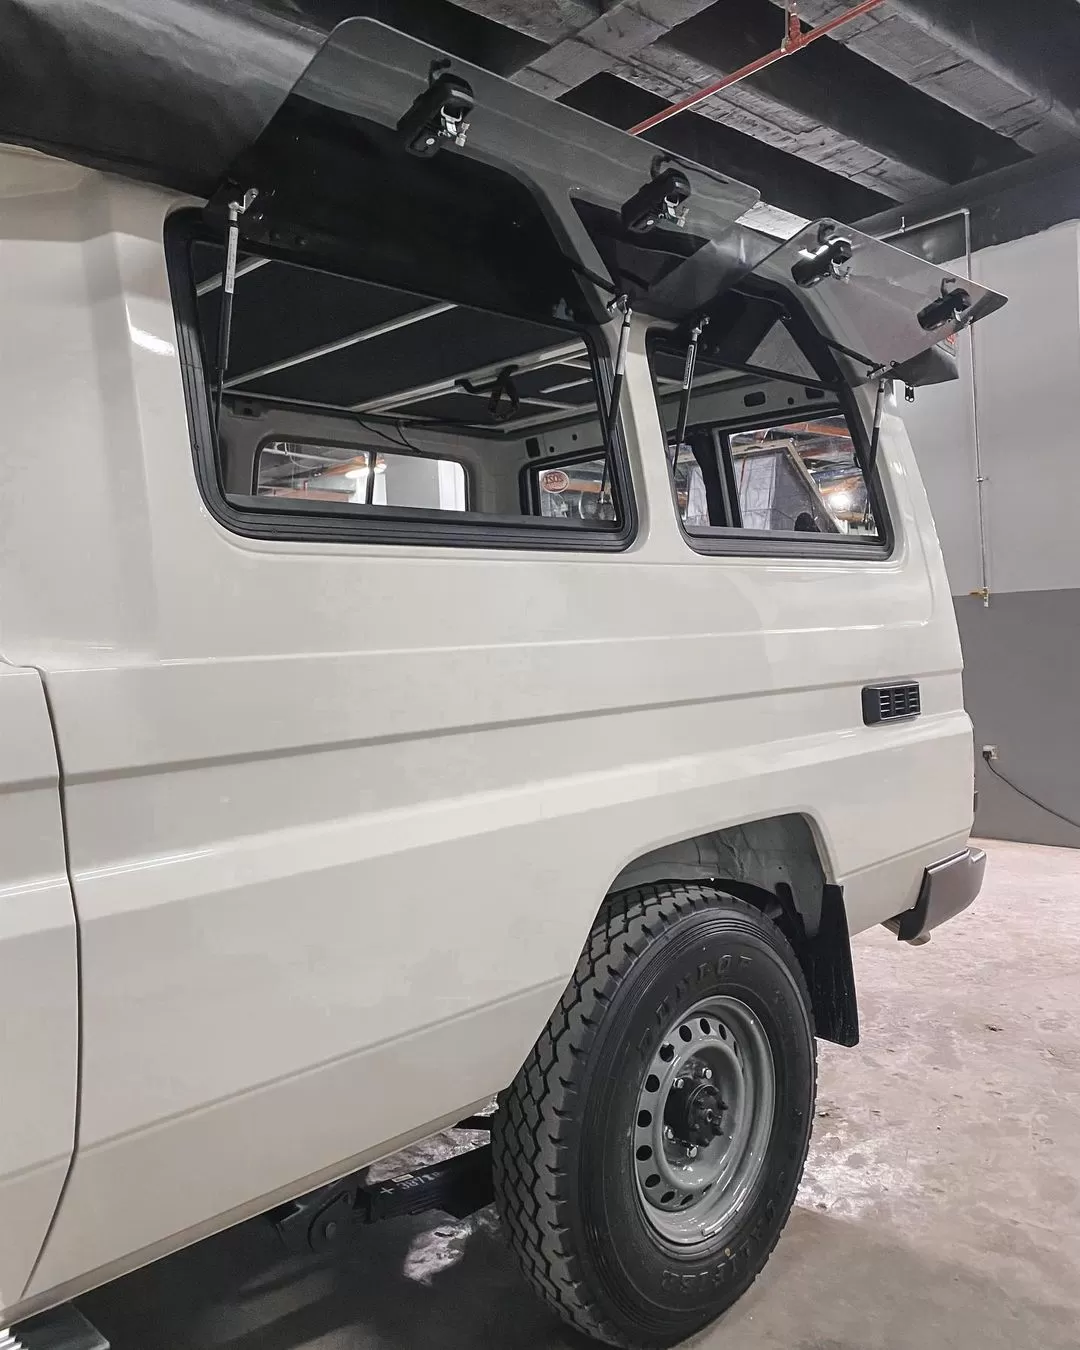 Explore Glazing Toyota Troop Carrier gullwing front and rear side